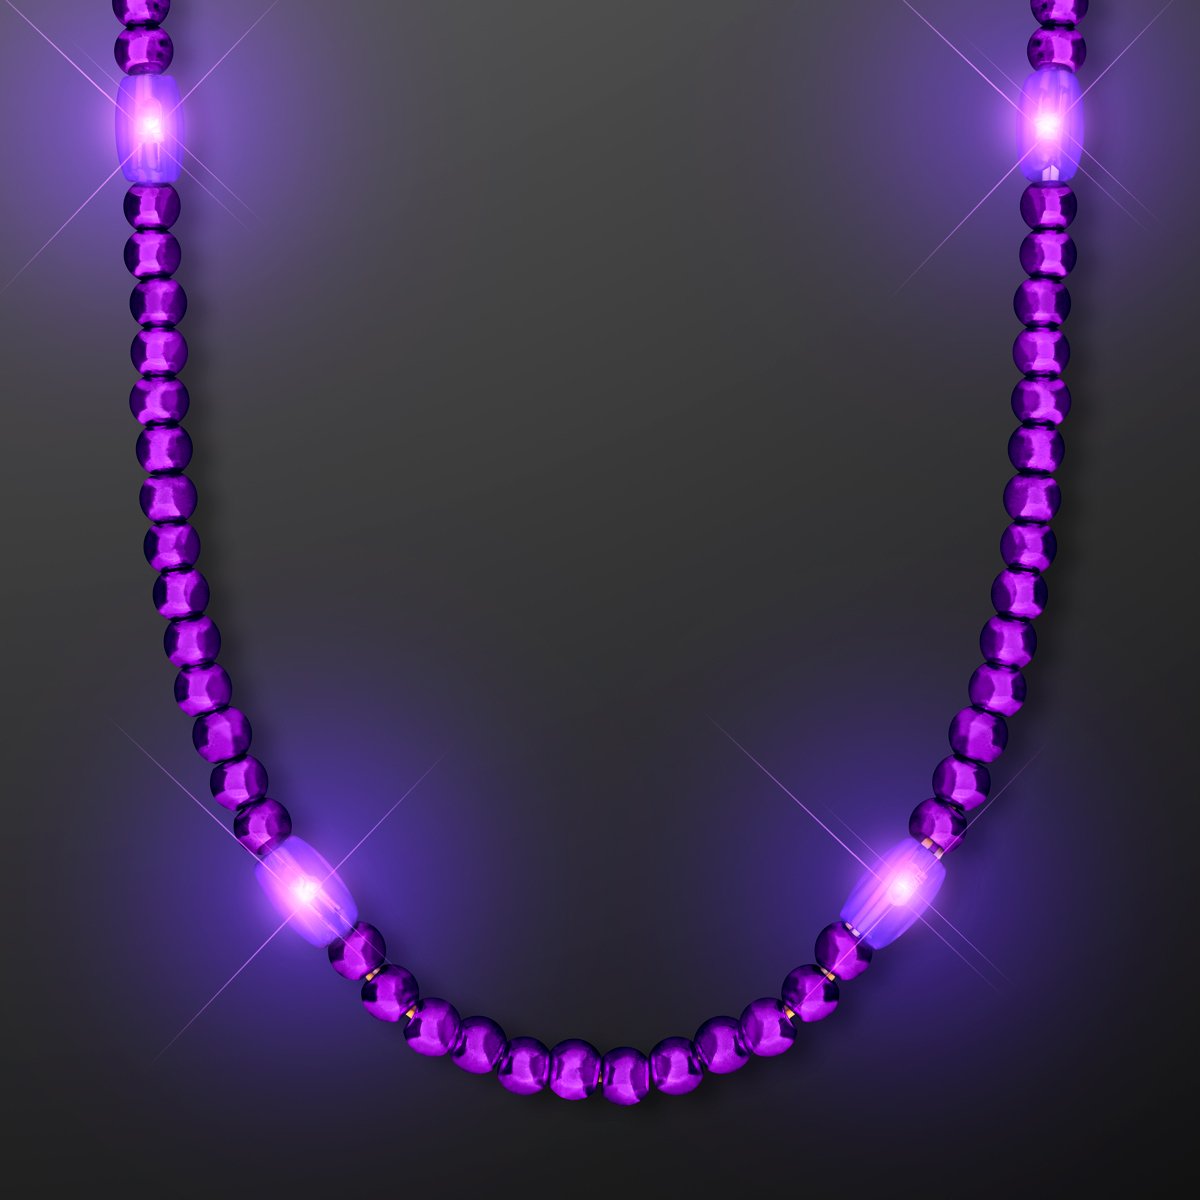 Light Up Halloween Jewelry by